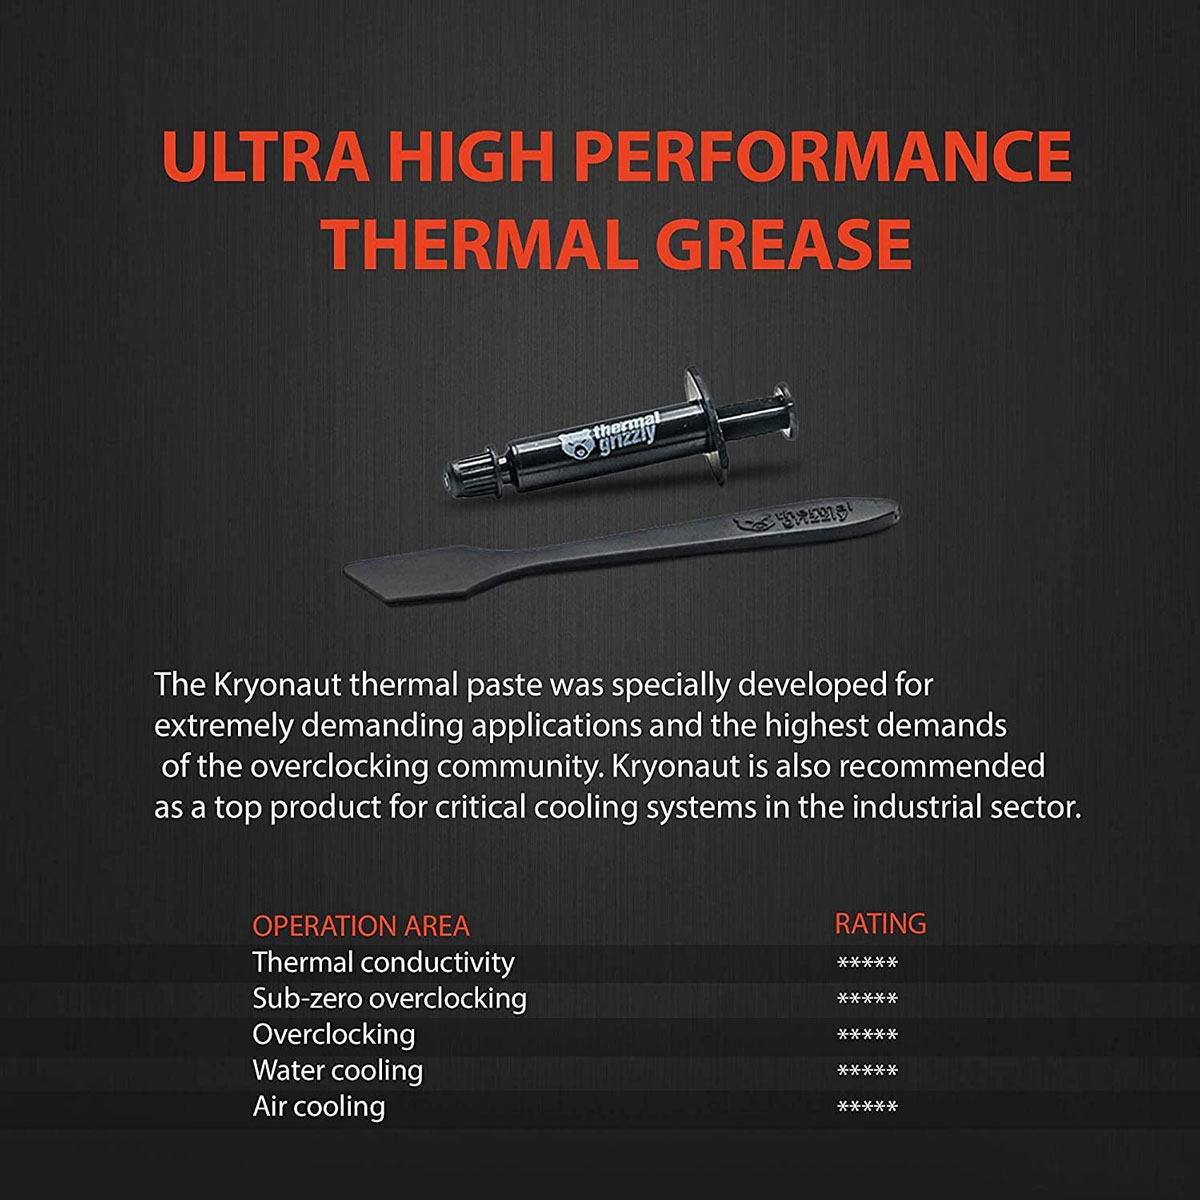 Thermal-Grizzly-Kryonaut-The-High-Performance-Thermal-Paste-1200px-v4.jpg